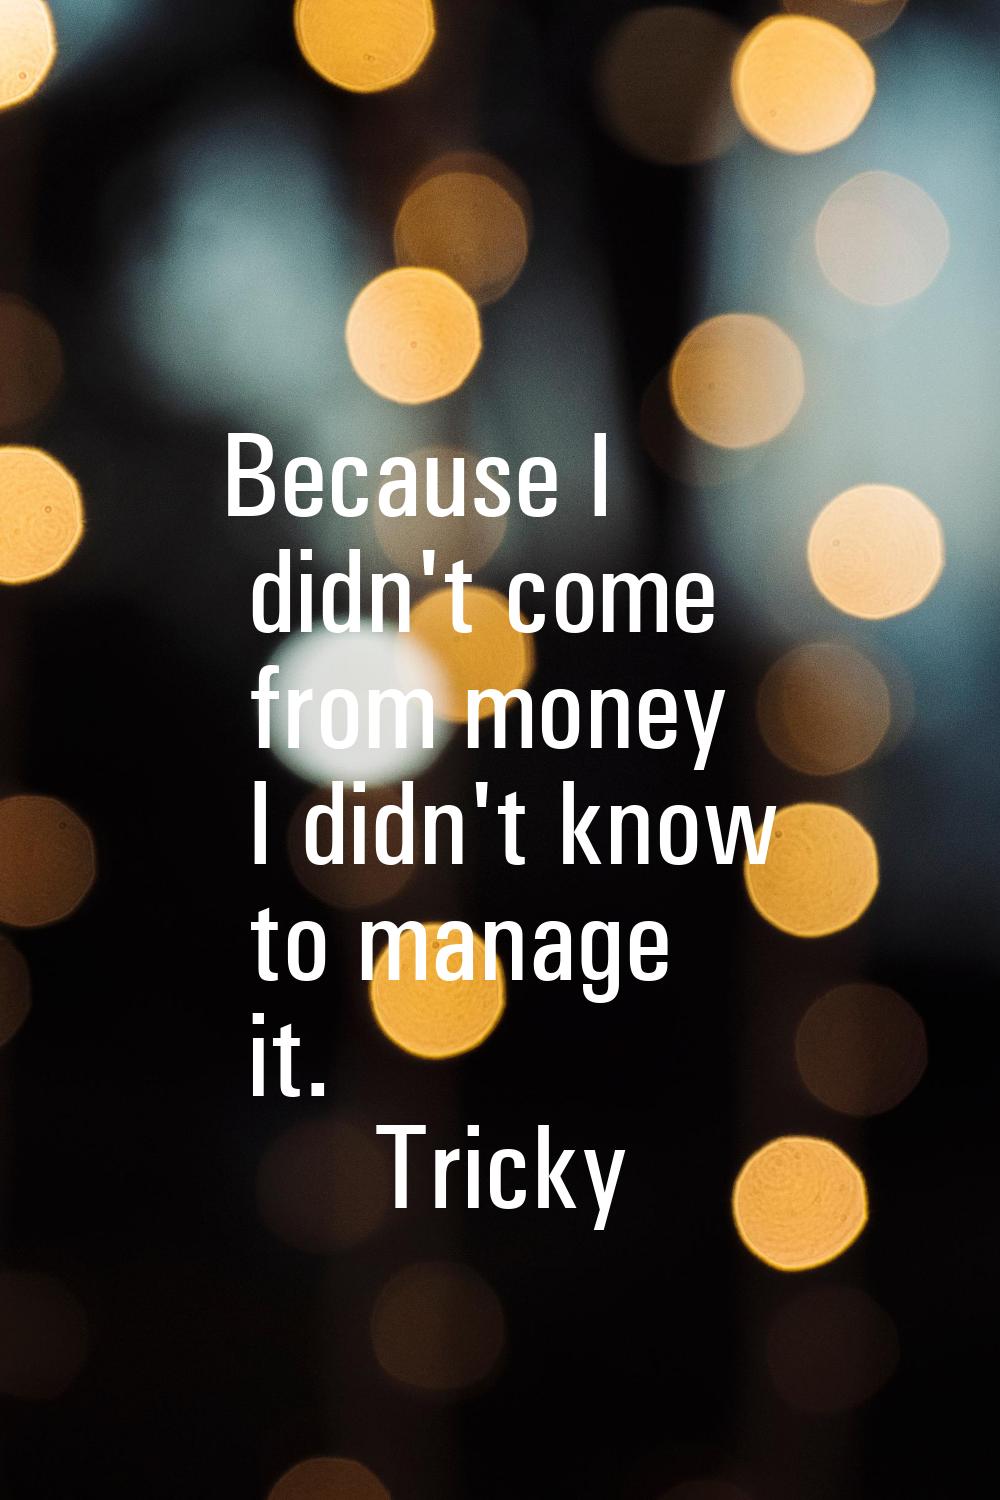 Because I didn't come from money I didn't know to manage it.